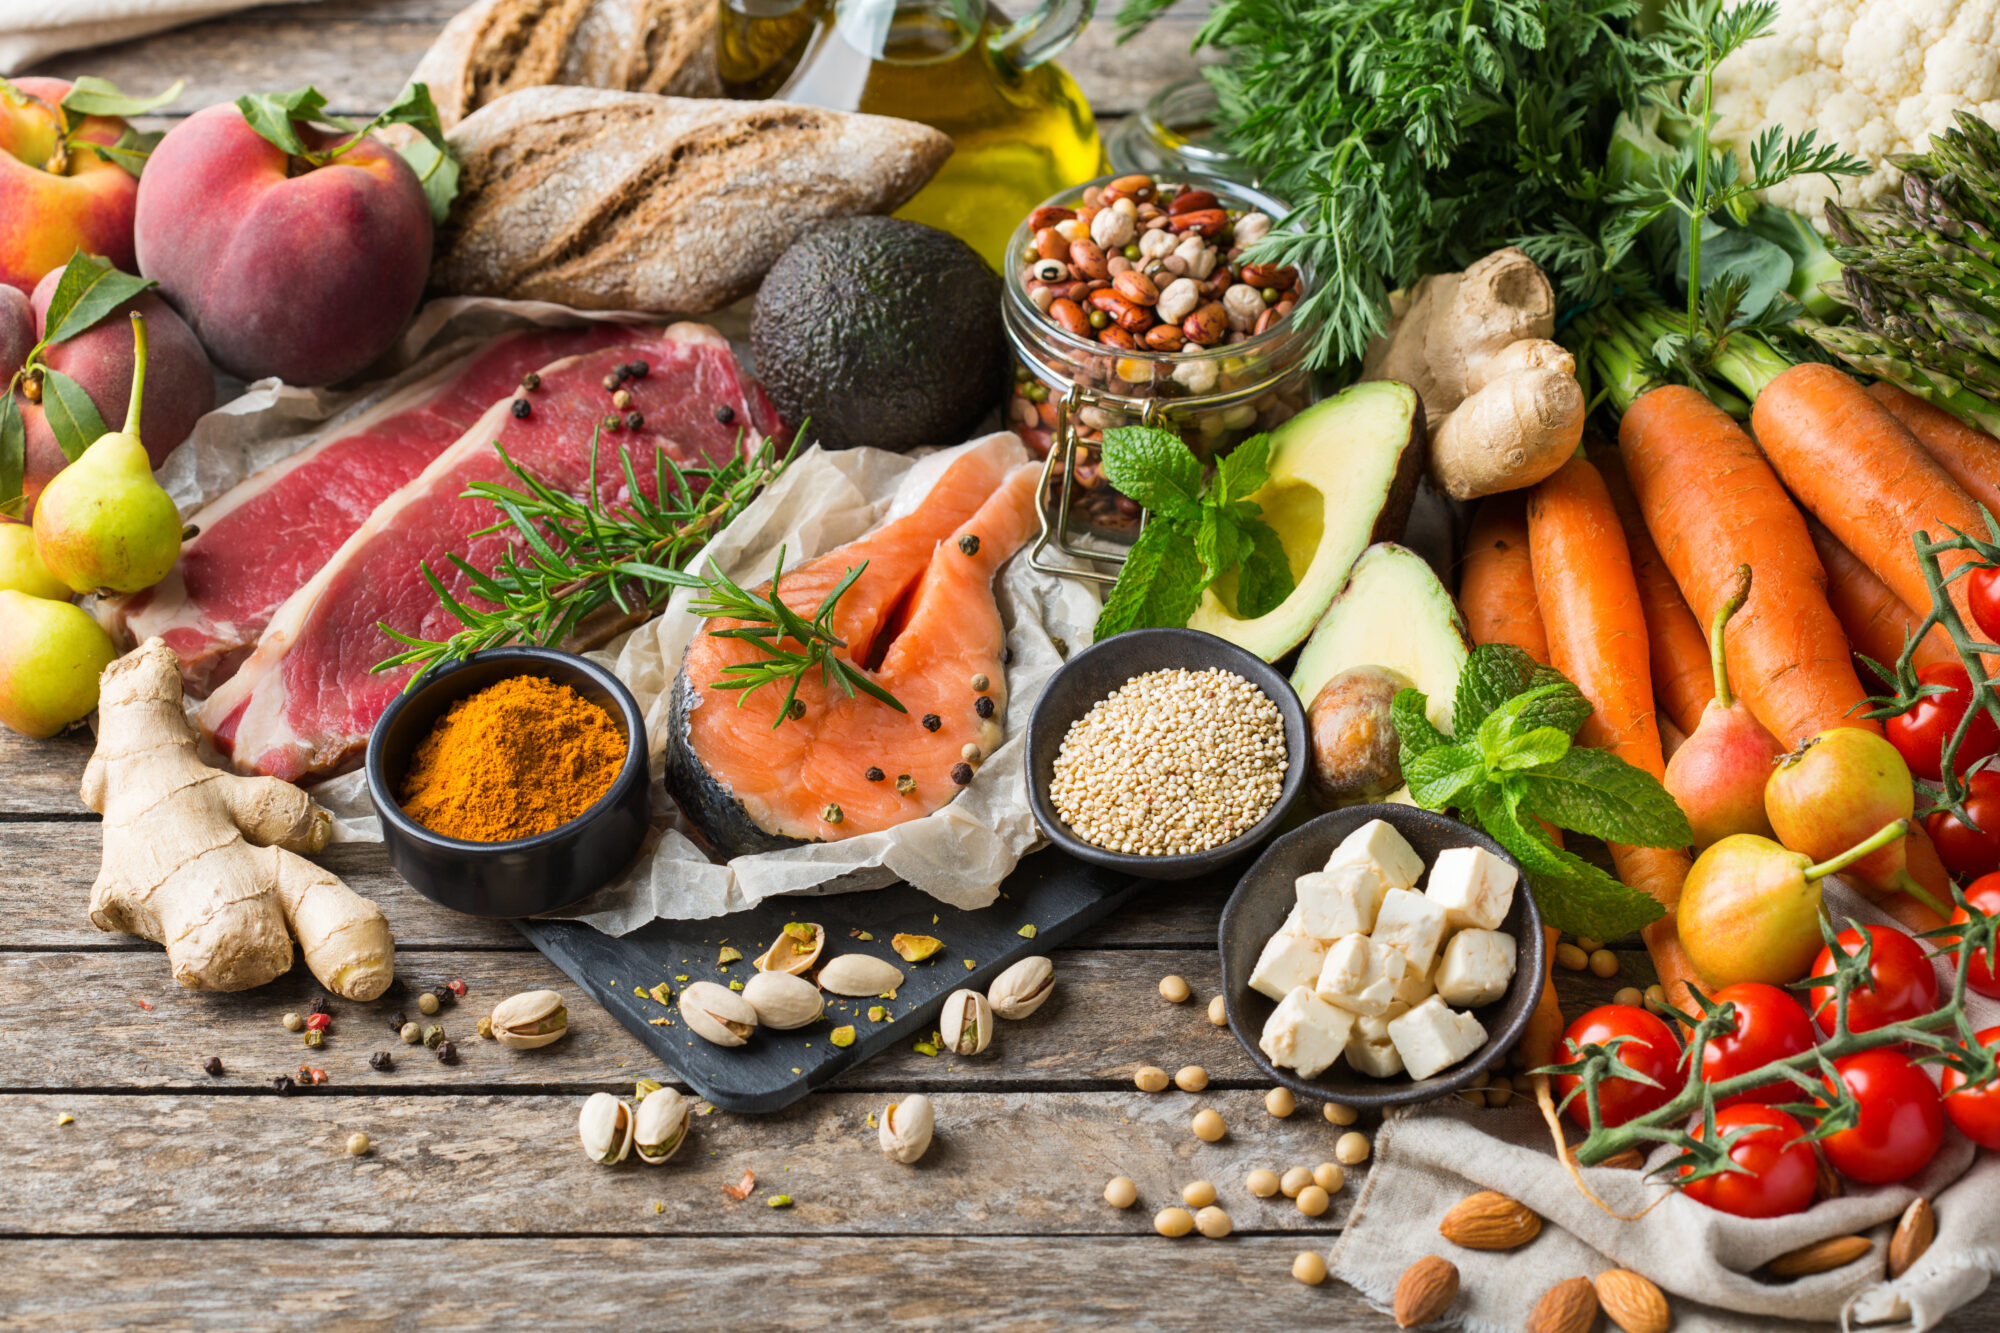 An assortment of healthy food ingredients for cooking on a wooden kitchen table, including vegetables, spices, nuts, legumes, and meats.